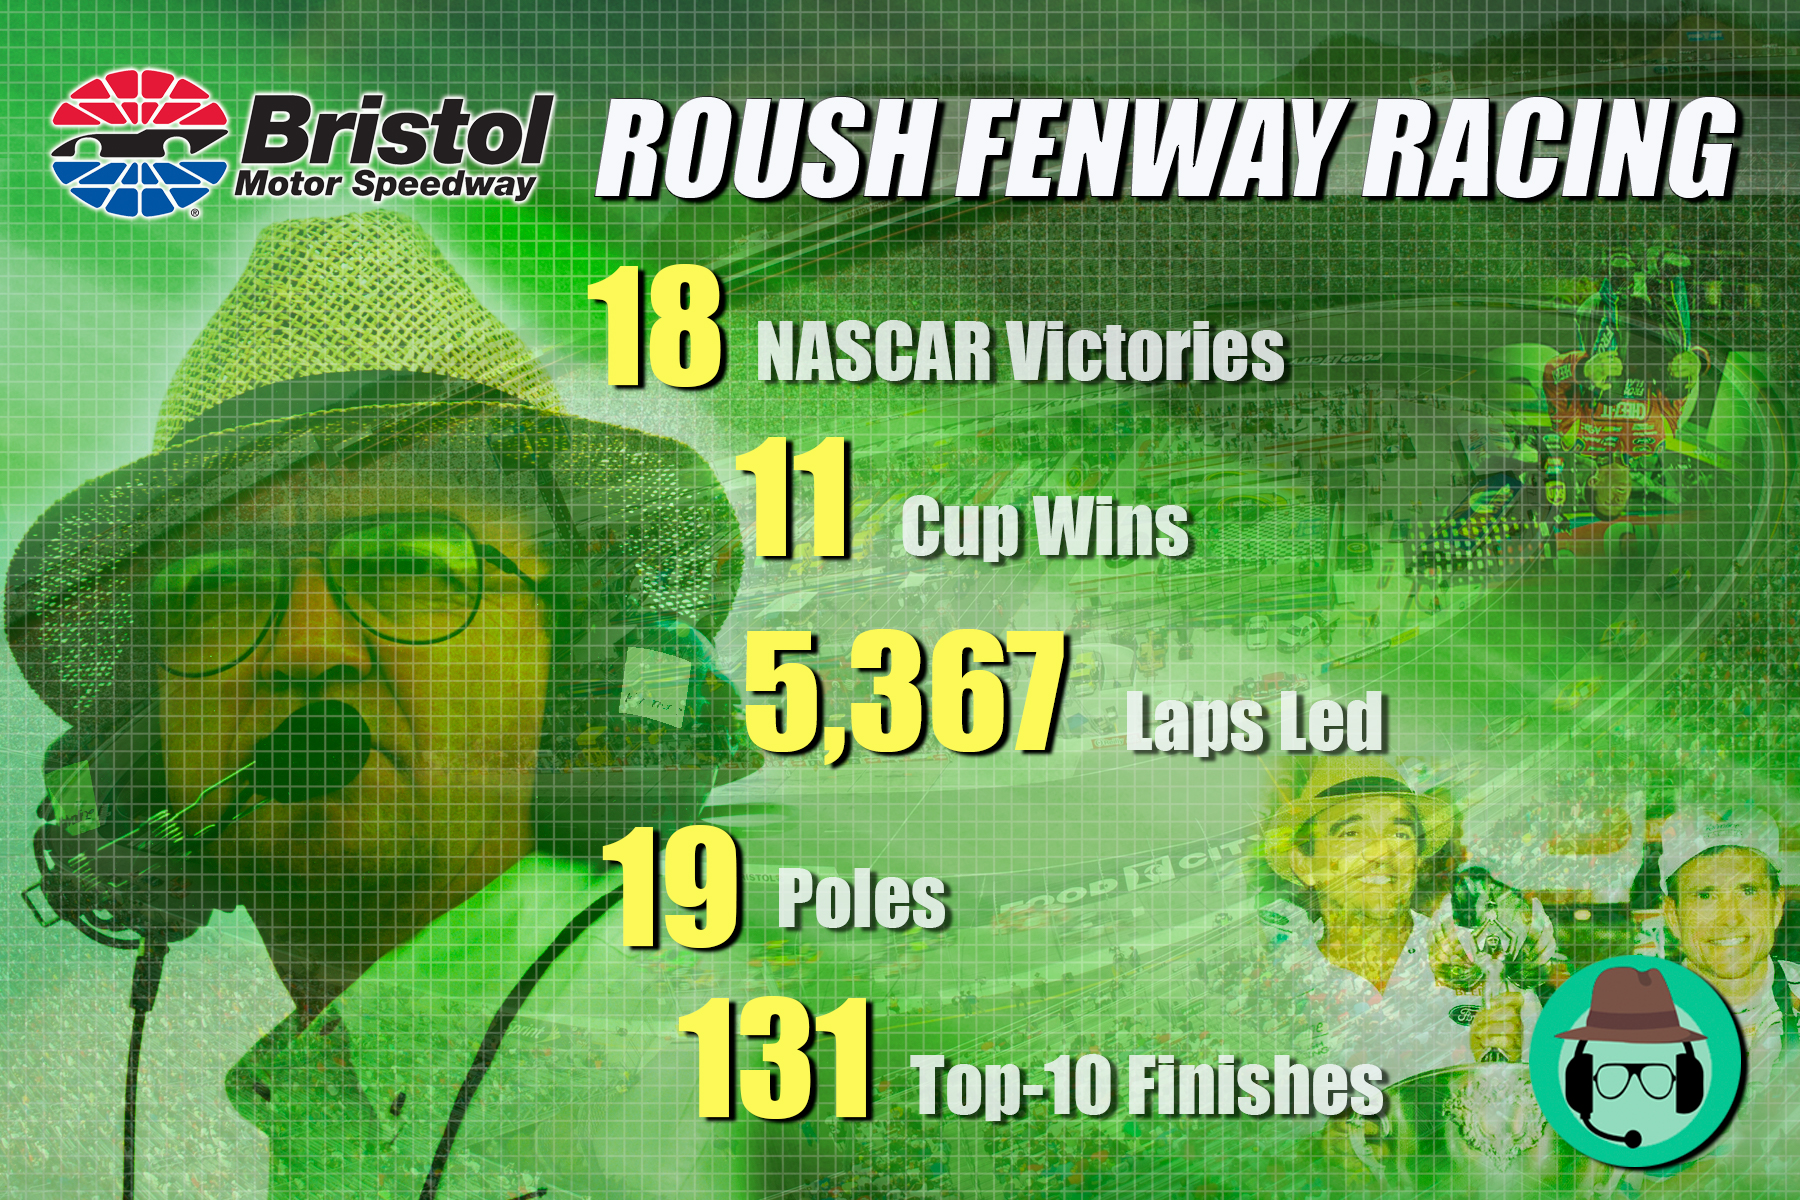 18-Time Winner; Roush Fenway has Excelled at Thunder Valley